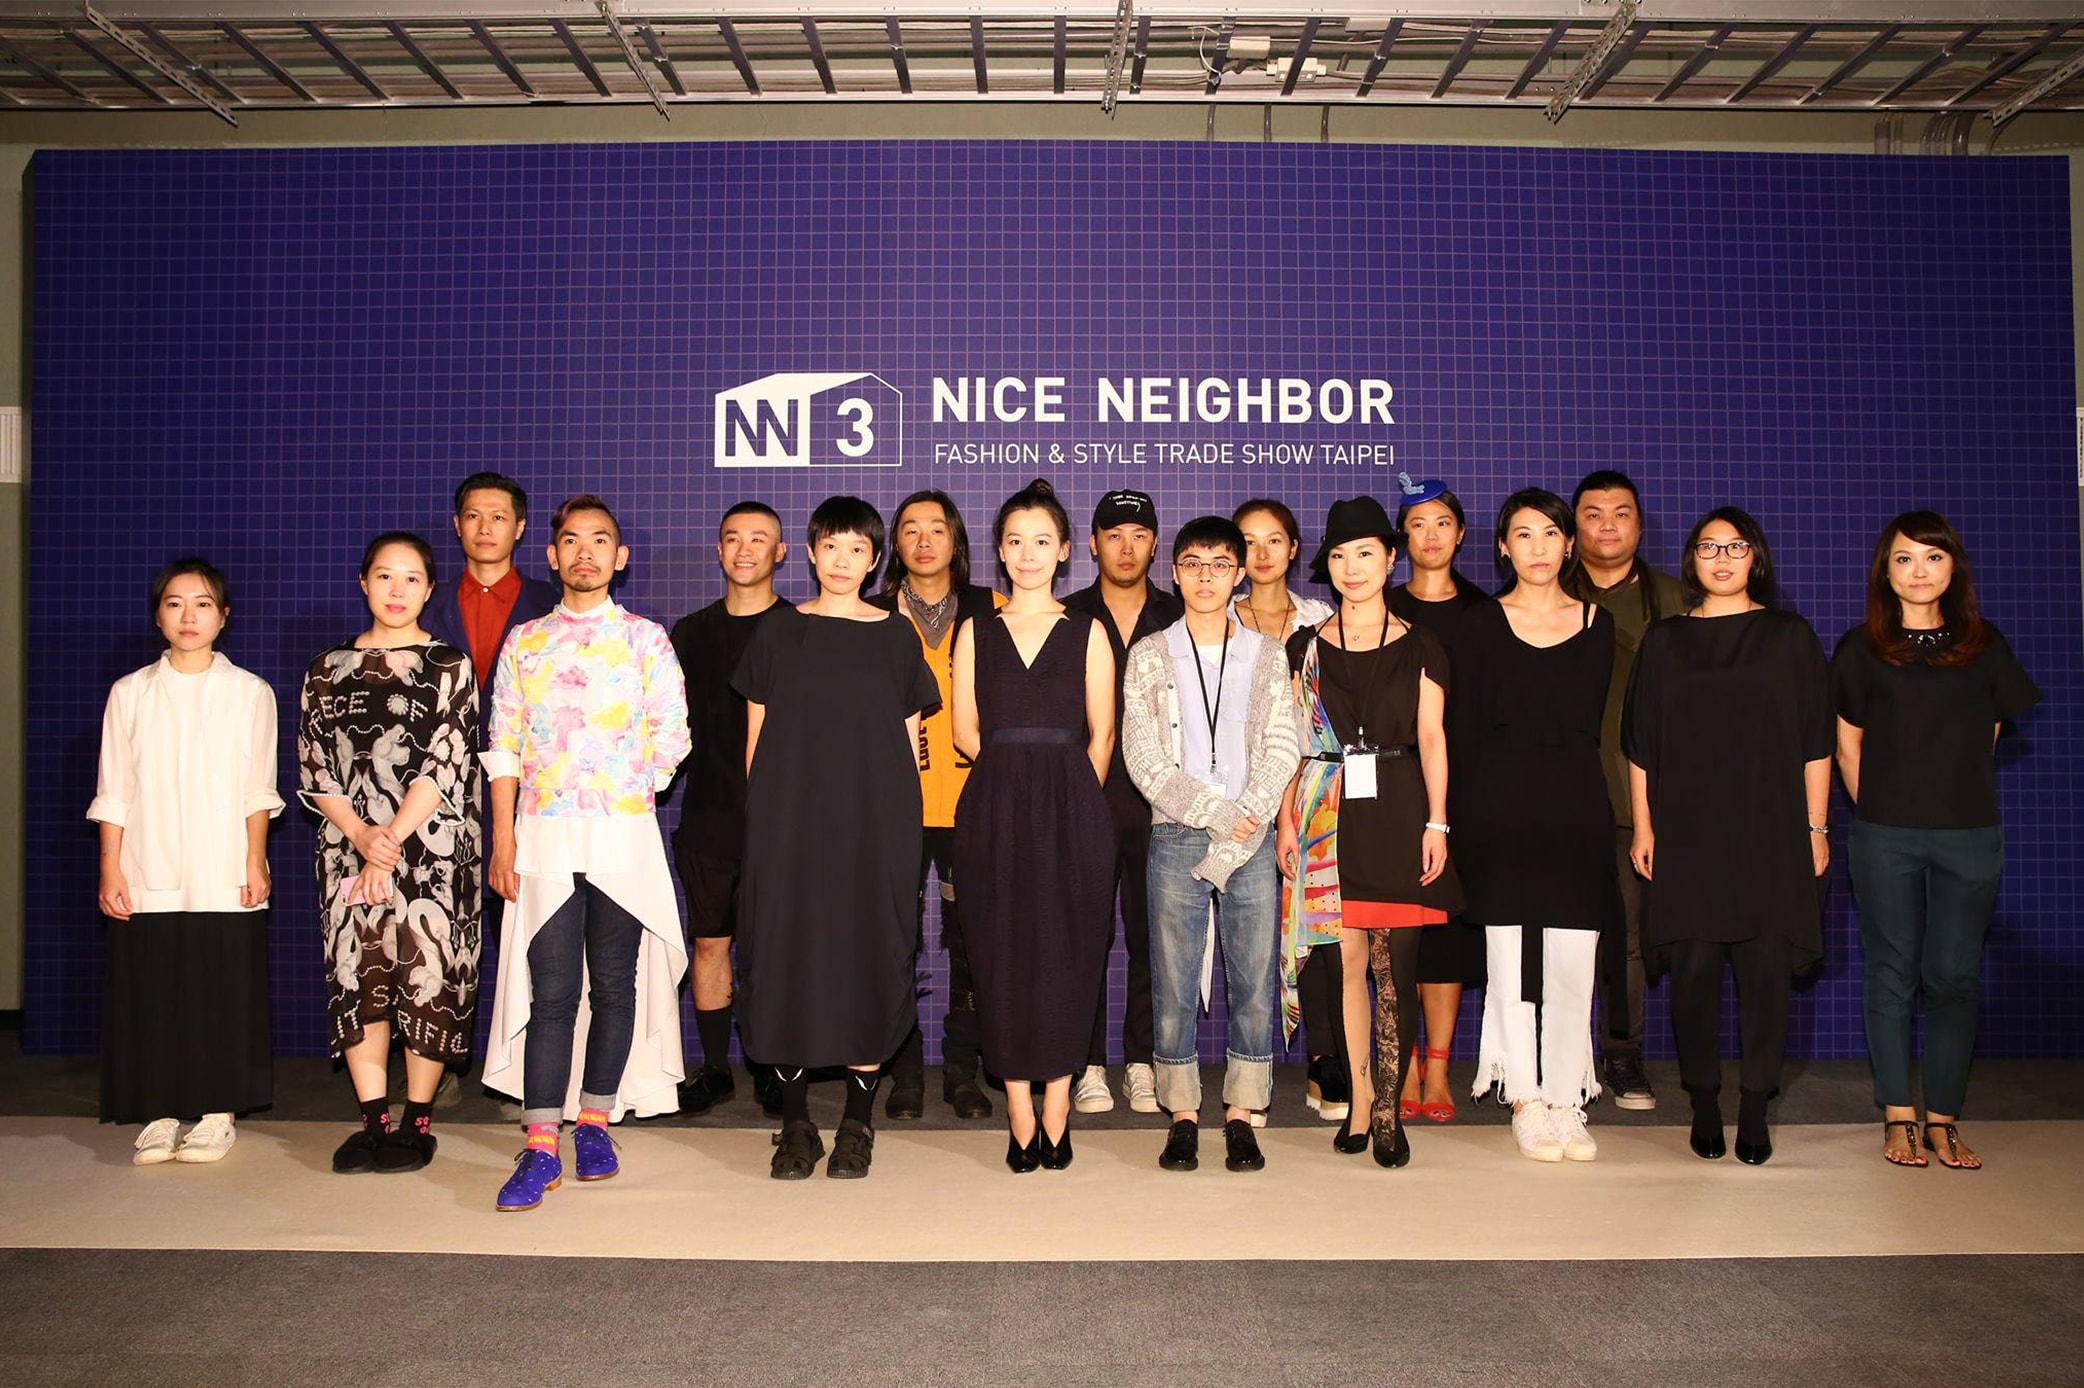 NICE NEIGHBOR the tradeshow includes Taiwanese and Japanese designers and influencers’ viewpoints and participation